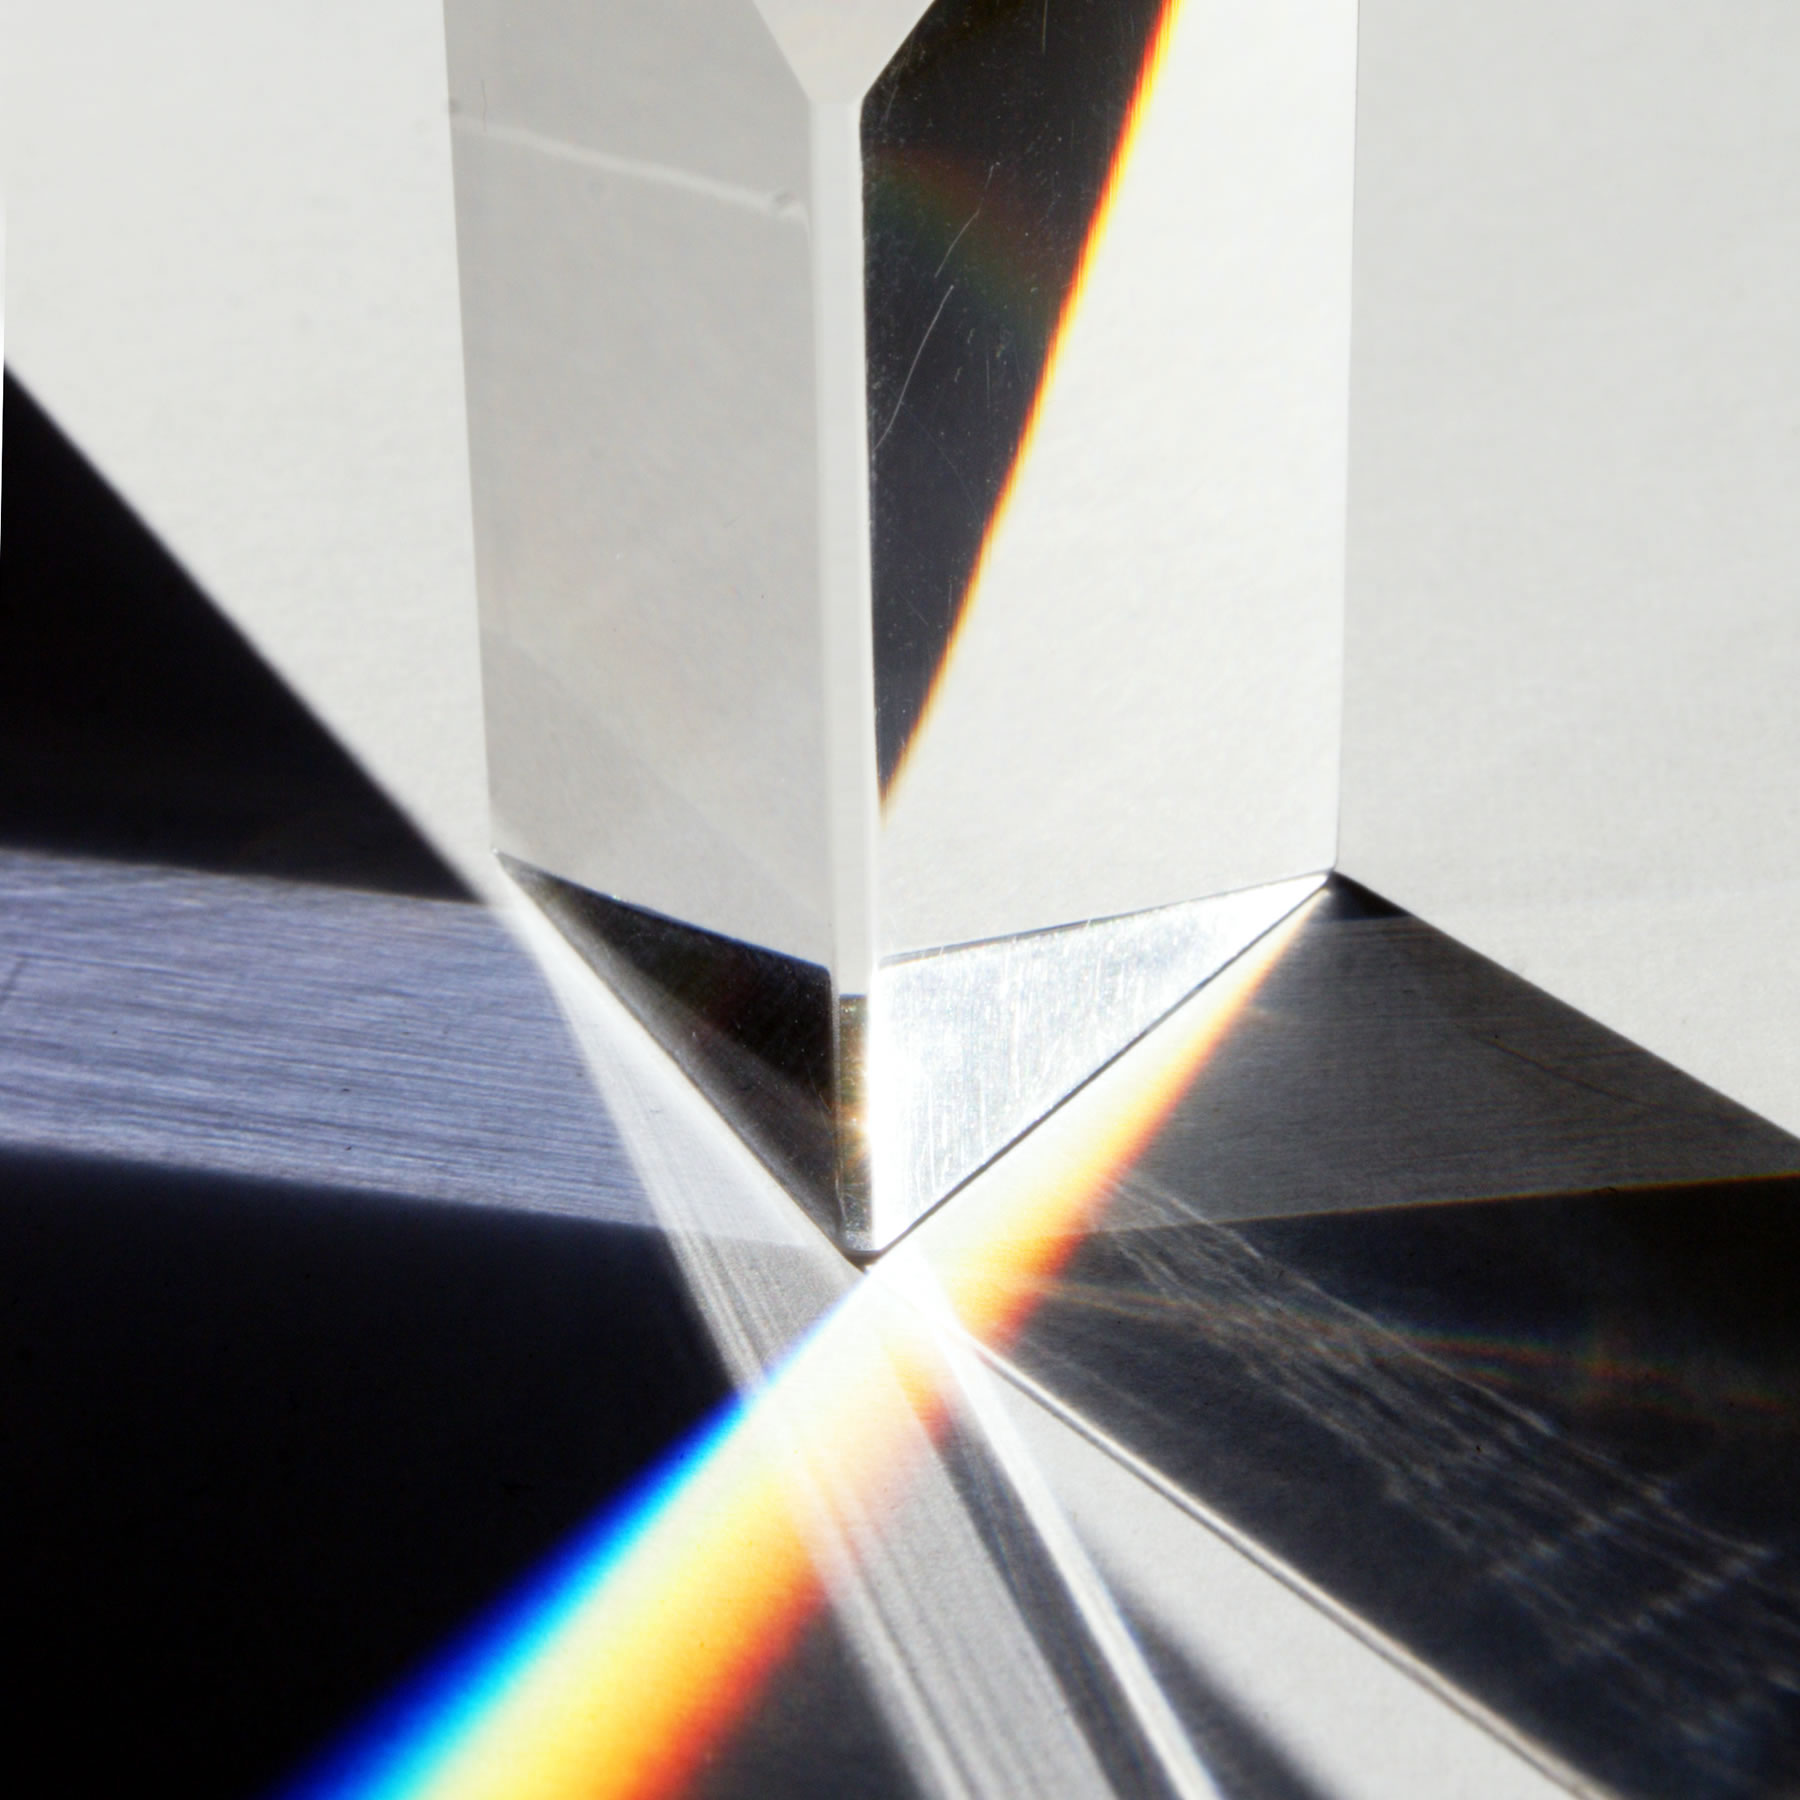 Prism reflecting and refracting light beautifully